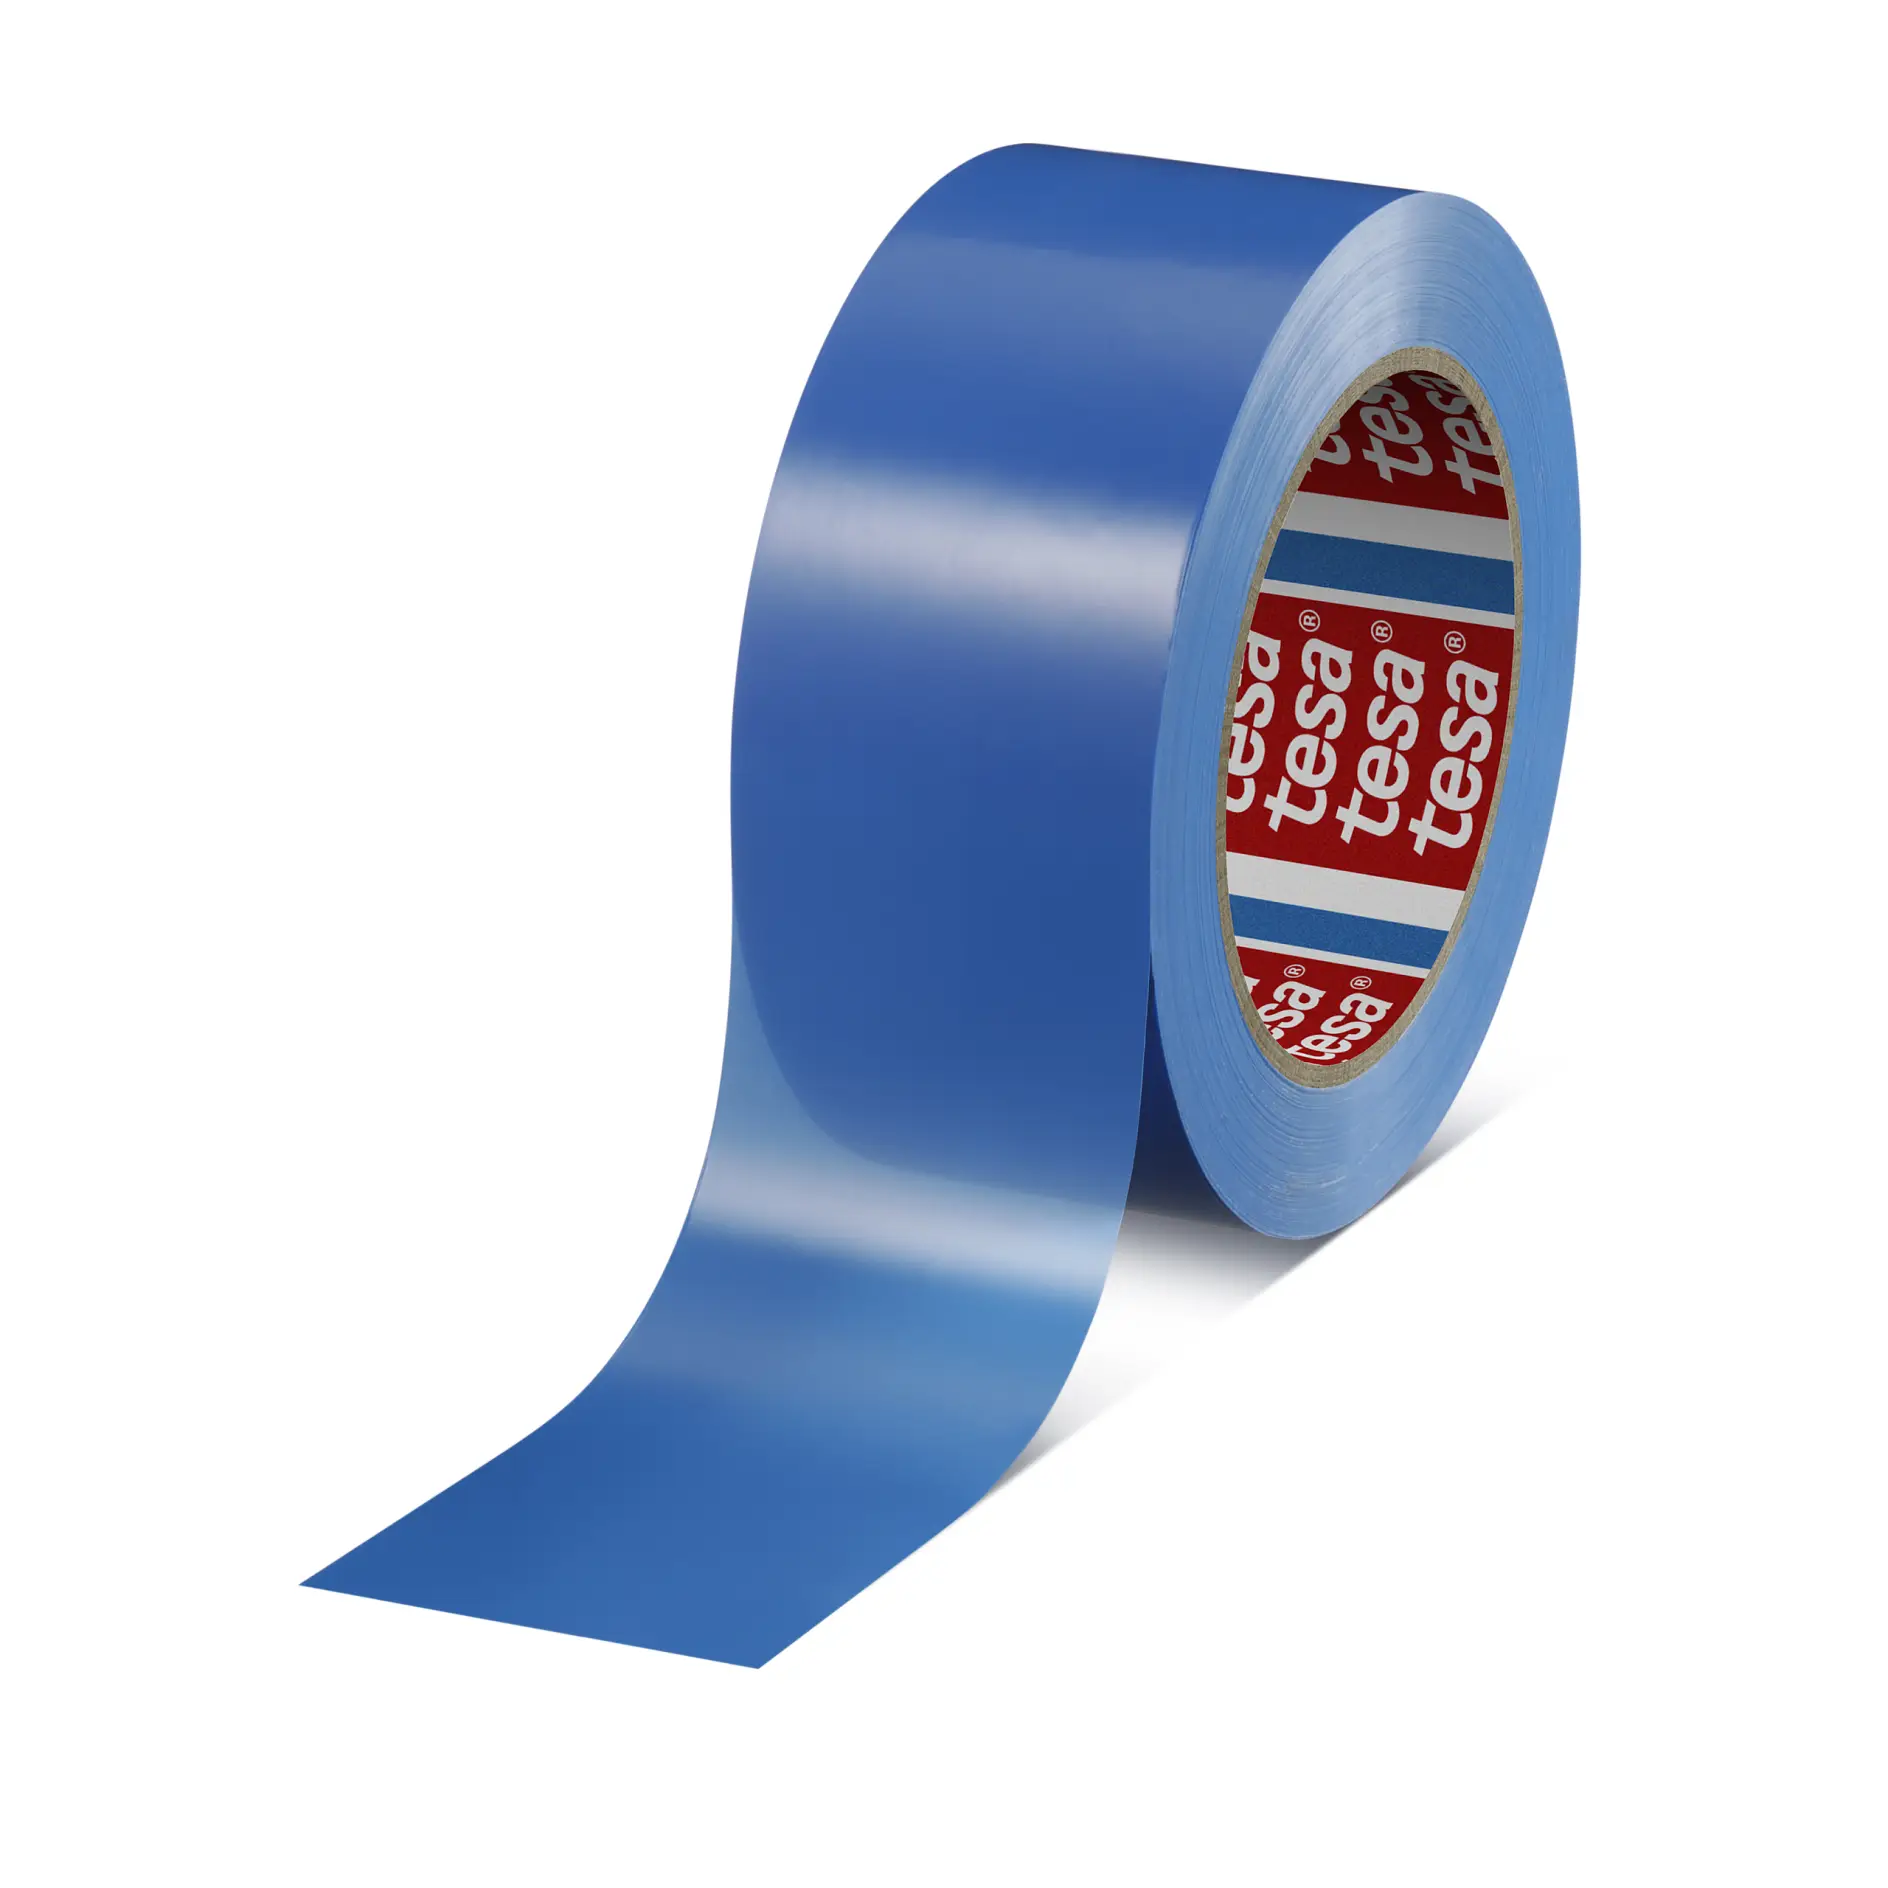 tesa-7133-interior-surface-protection-and-masking-tape-blue-071330001200-pr